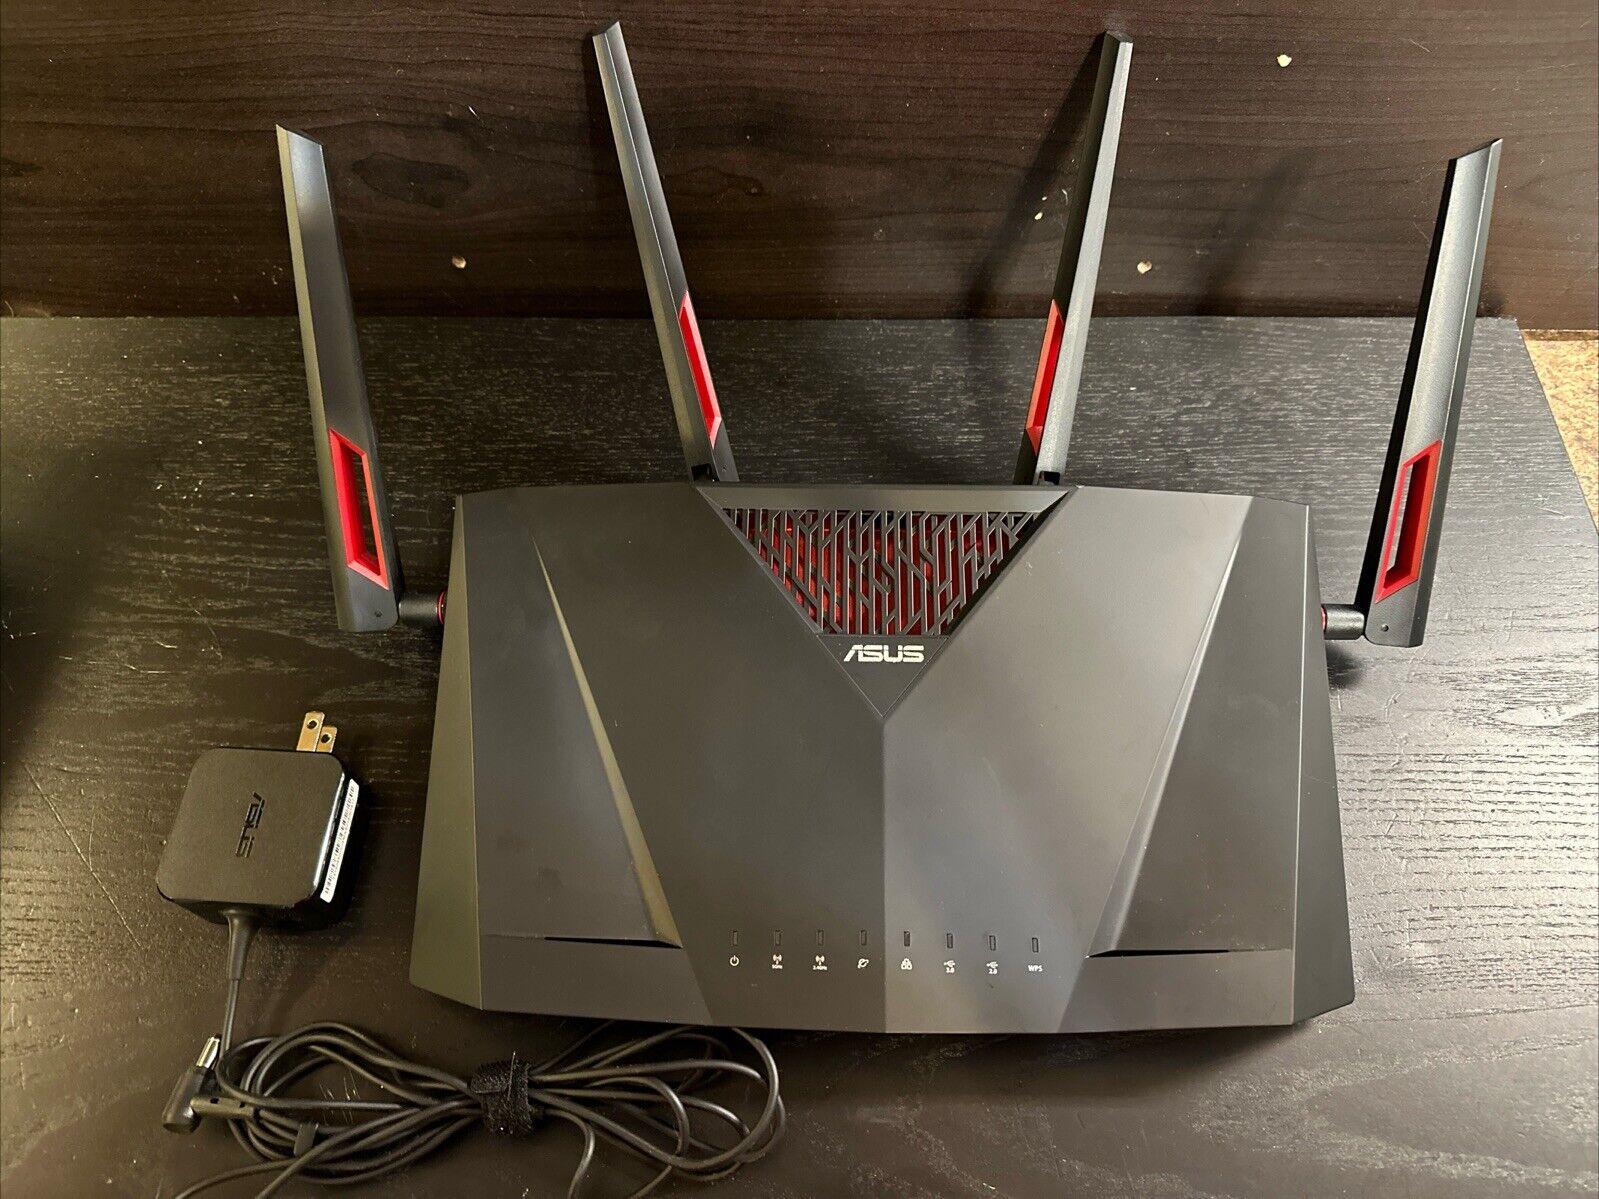 ASUS RT-AC88U Wireless AC3100 Dual Band Gigabit Gaming Router (POWER-TESTED)